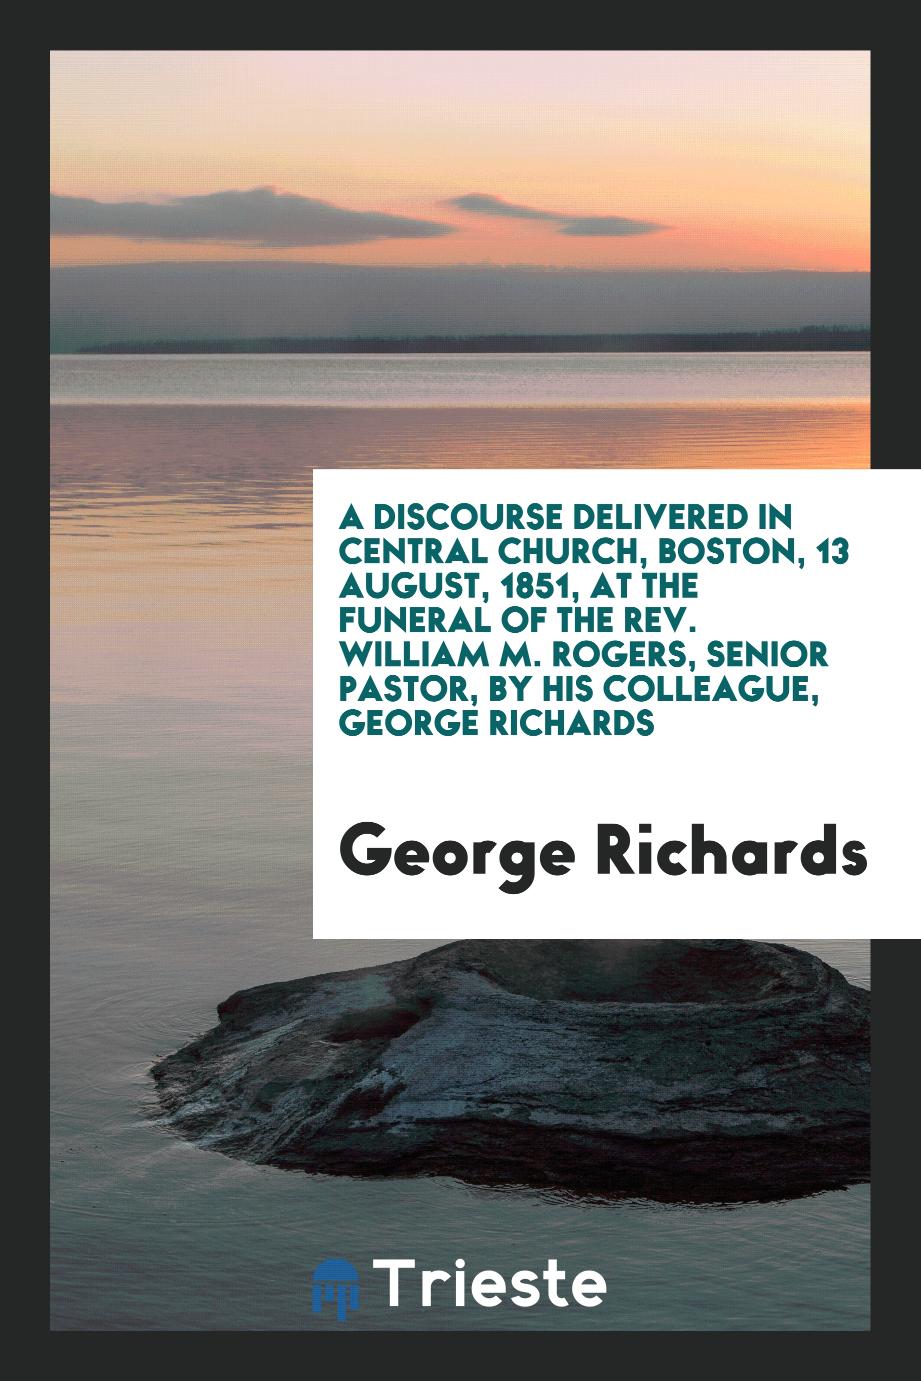 A Discourse Delivered in Central Church, Boston, 13 August, 1851, at the Funeral of the Rev. William M. Rogers, Senior Pastor, by his colleague, George Richards